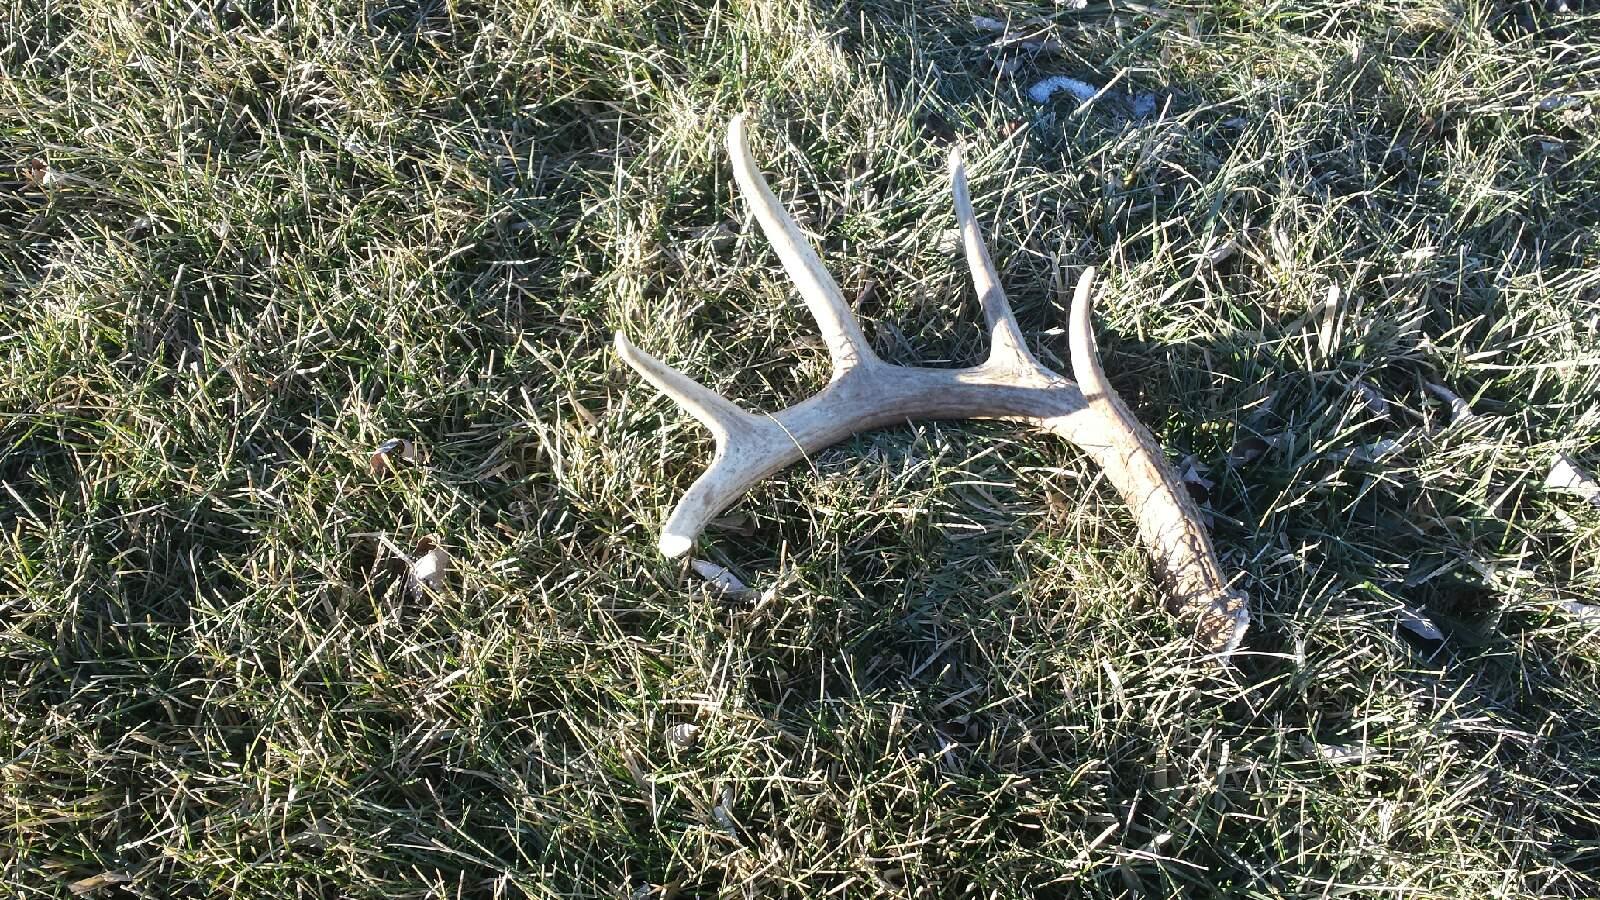 Shed White-tailed deer antler. Photo by Rob Schuette.